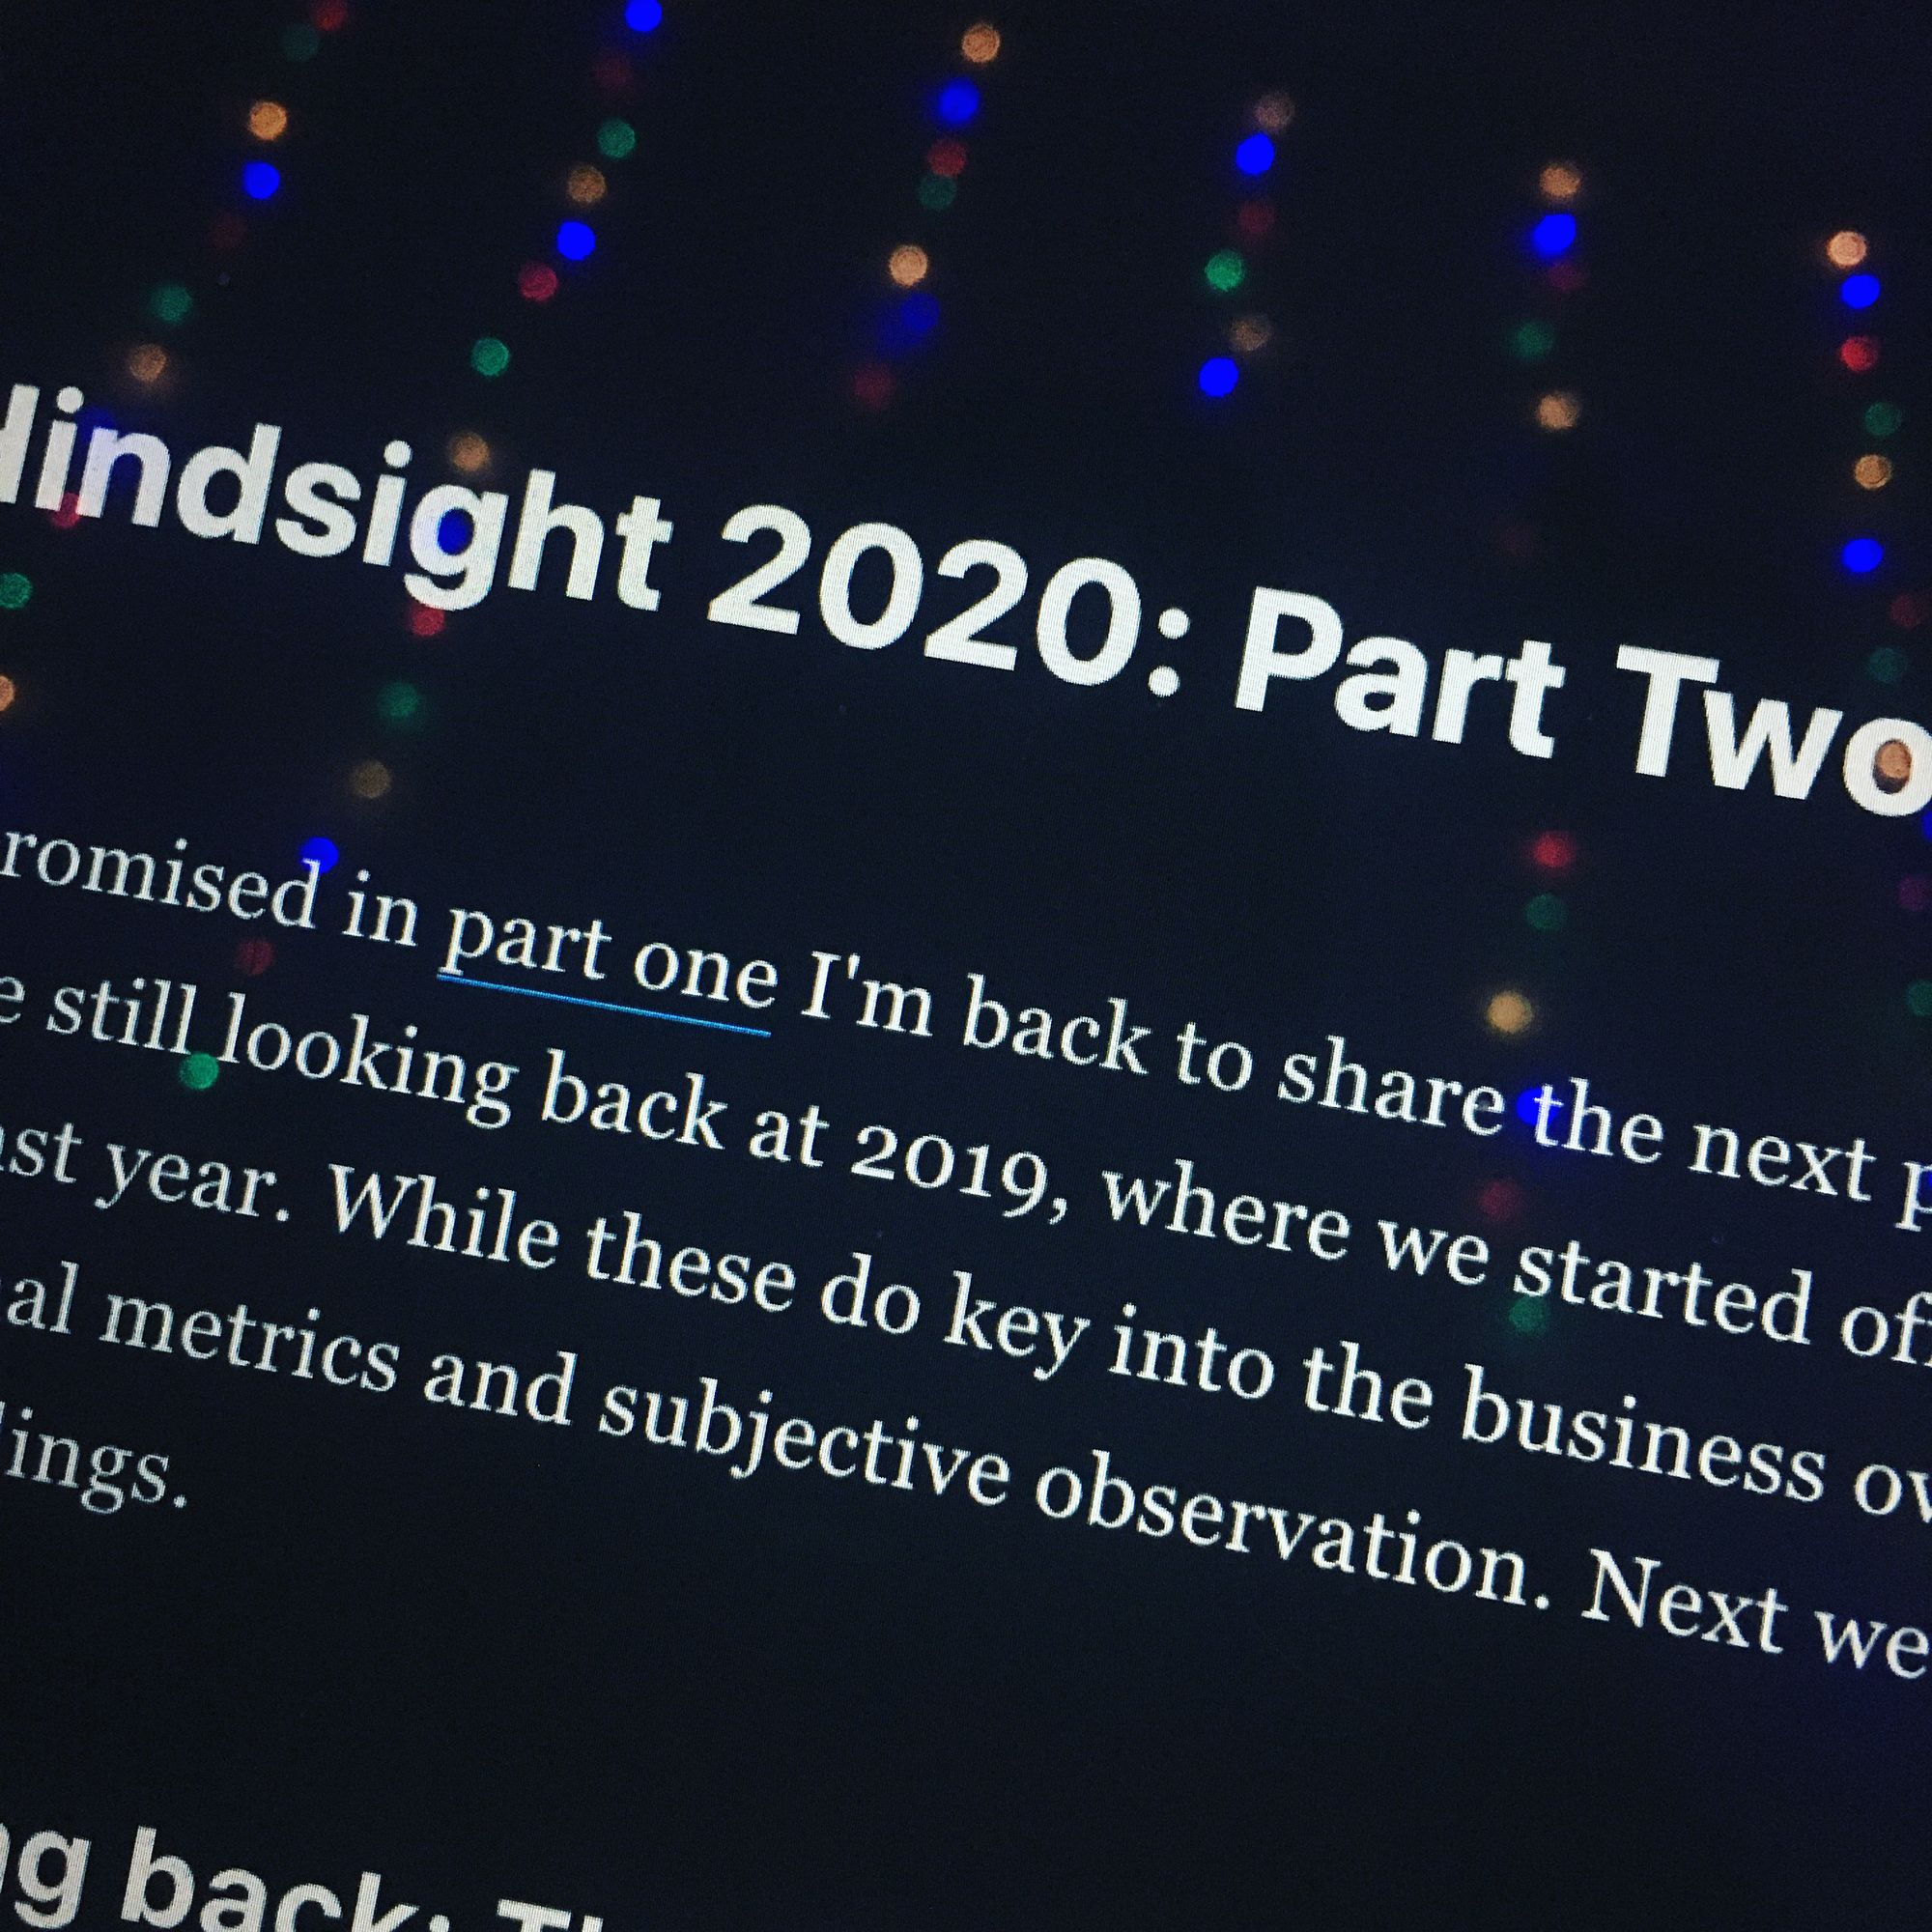 Hindsight 2020: Part Two